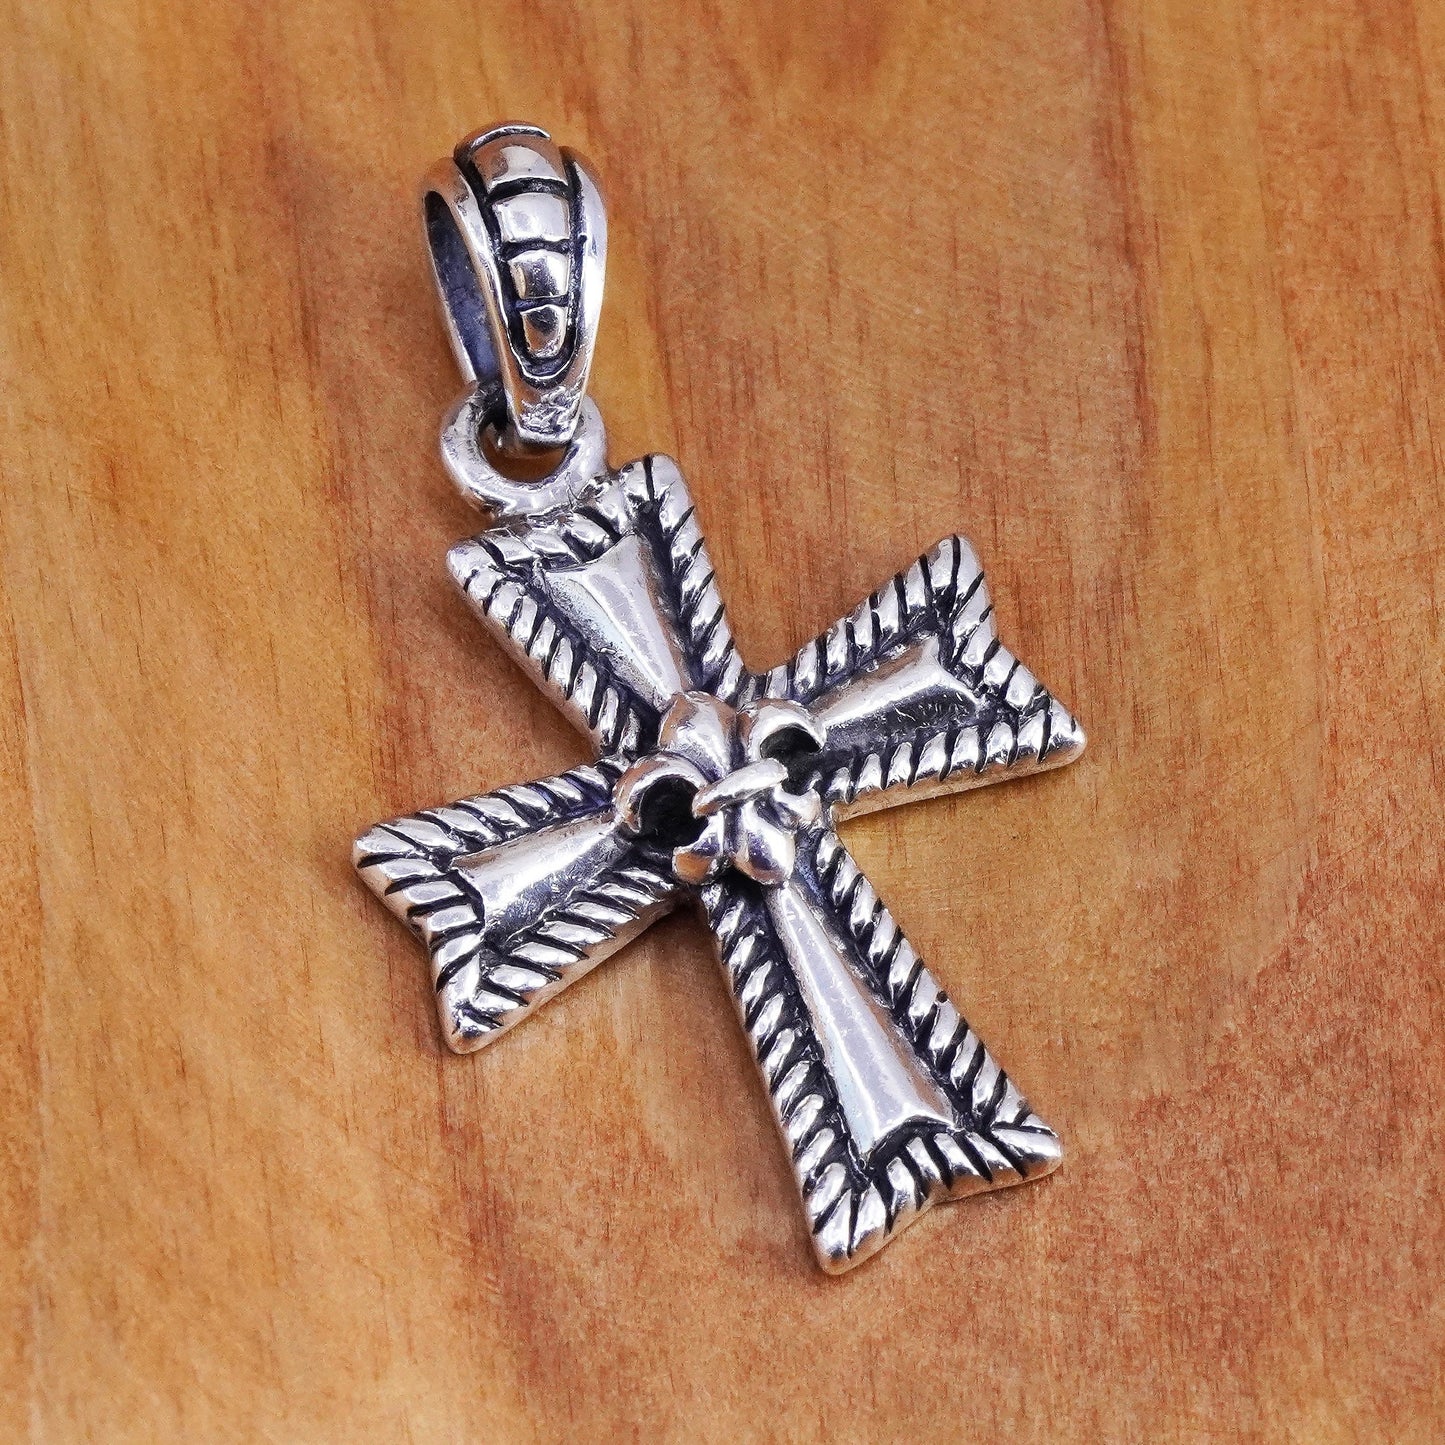 Vintage Sterling silver handmade pendant, 925 cross with fleur de lis and cable